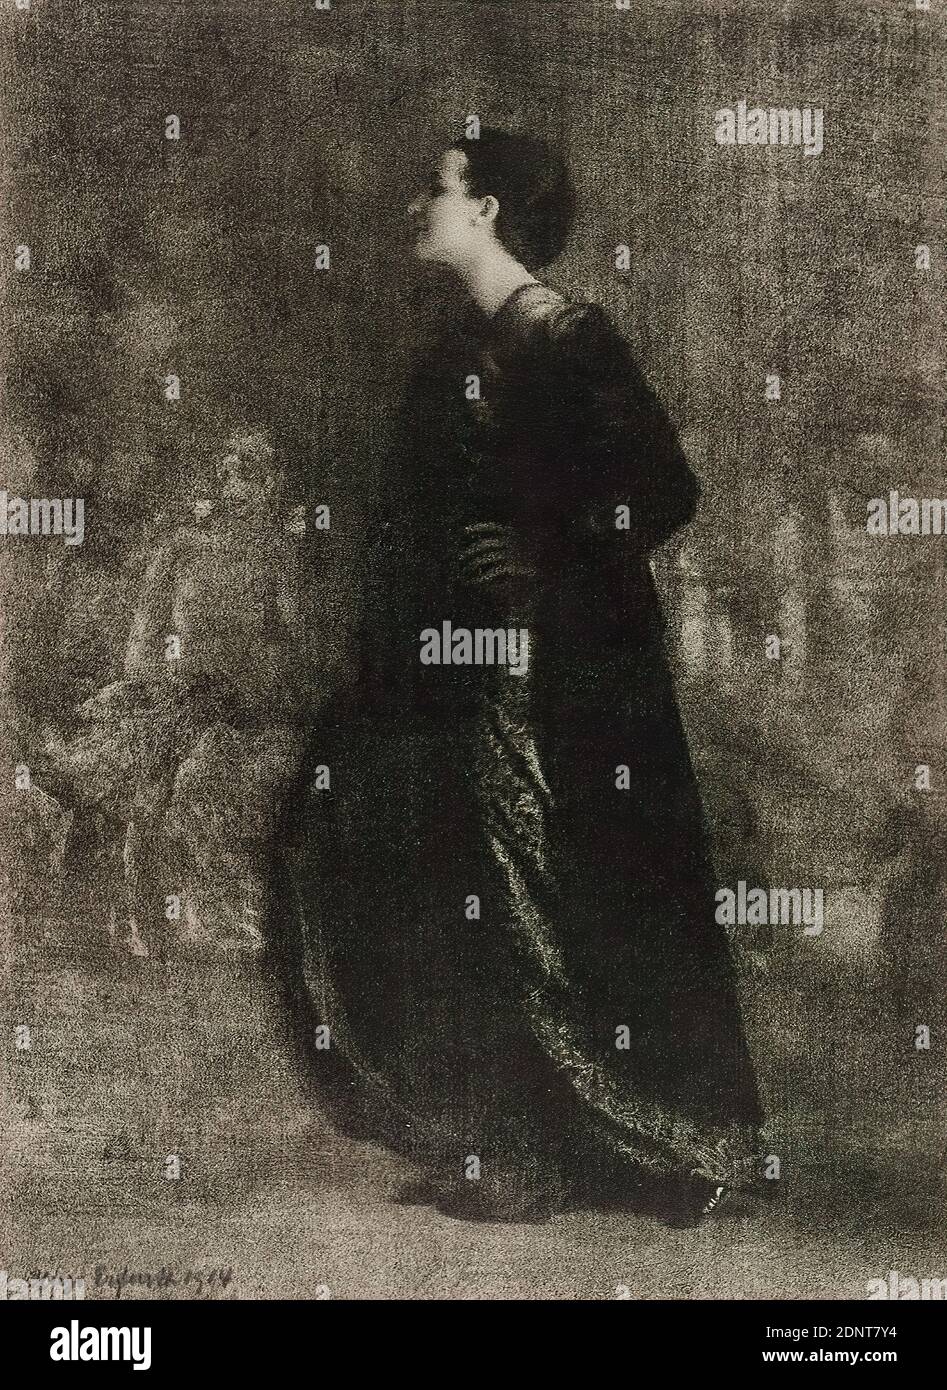 Hugo Erfurth, Maria Carmi, Staatliche Landesbildstelle Hamburg, collection on the history of photography, paper, oil print, image size: height: 21,2 cm; width: 15,5 cm, signed and dated: recto u. li.: in lead: Hugo Erfurth 1914, inscribed: verso on the cardboard: in lead: LBH, Erfurth, repro no, Stamp: verso and right on the cardboard: Landesbildstelle Hamburg, inscribed: verso and left on the passepartout: in lead: repro no, Measurements, Maria Carmi (1880-1957); with black felt-tip pen: Hugo Erfurth 1914 Stock Photo